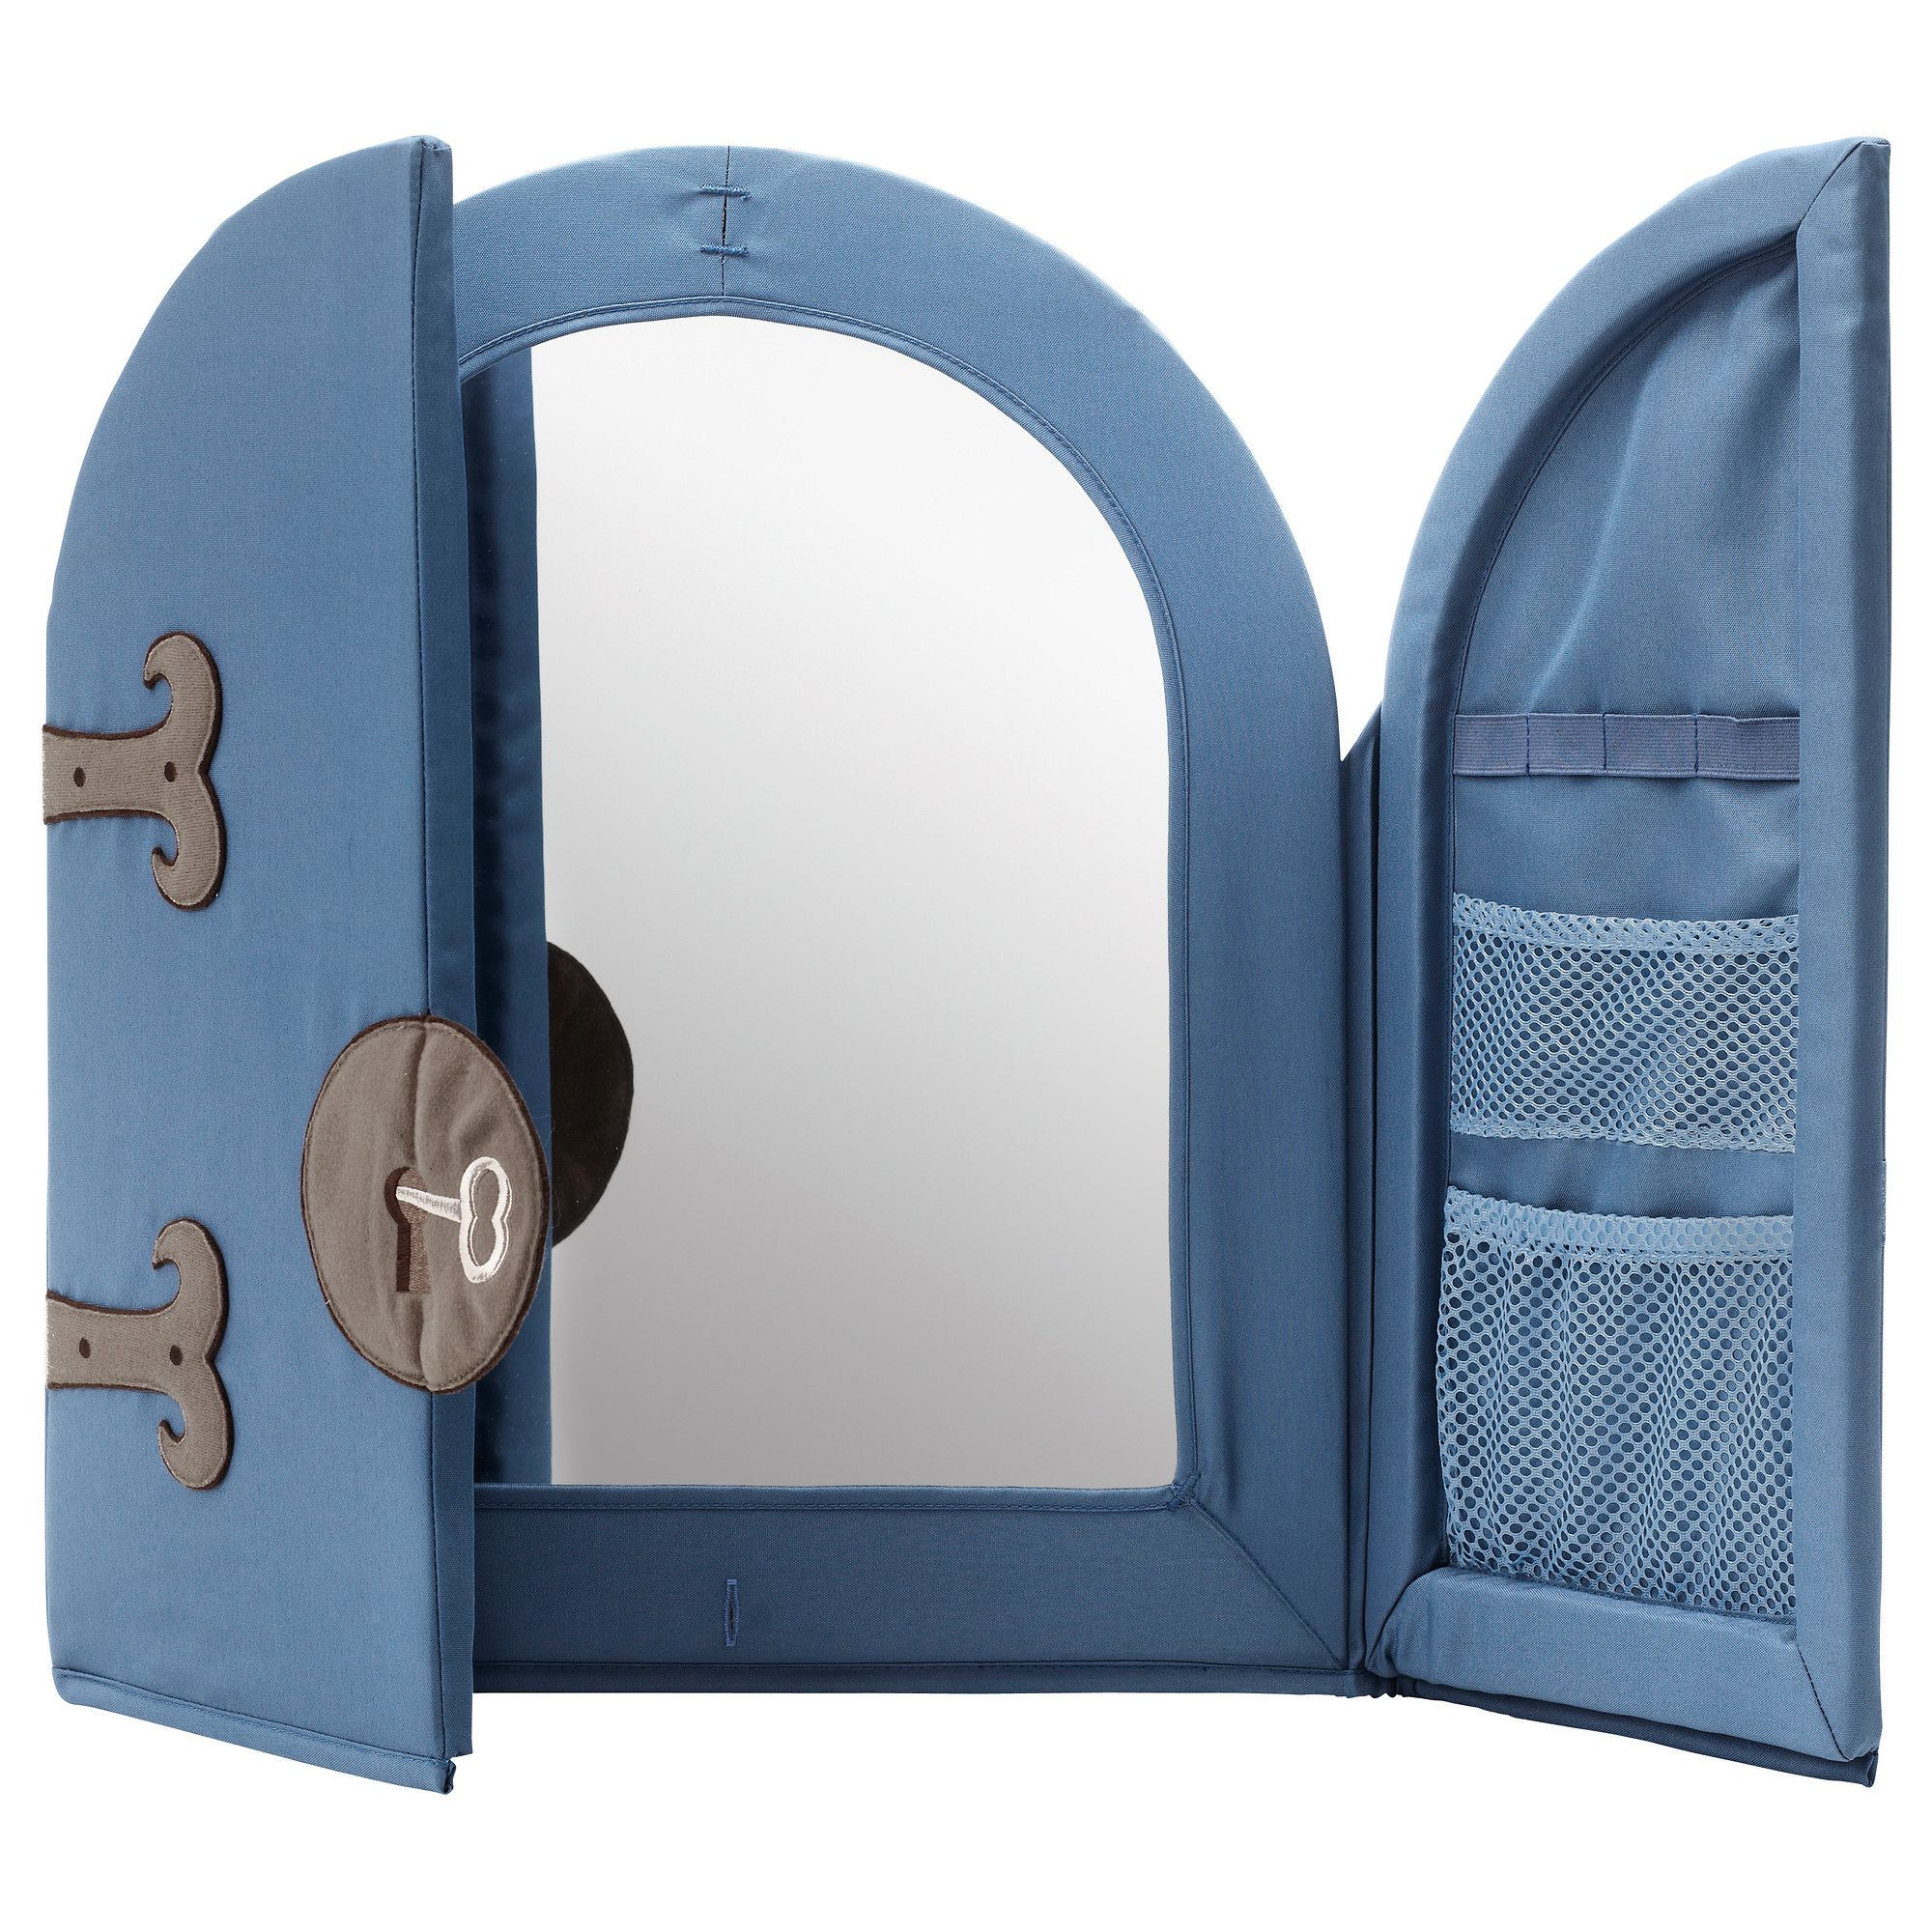 Mirrors For Kids Room
 US Furniture and Home Furnishings the Wall